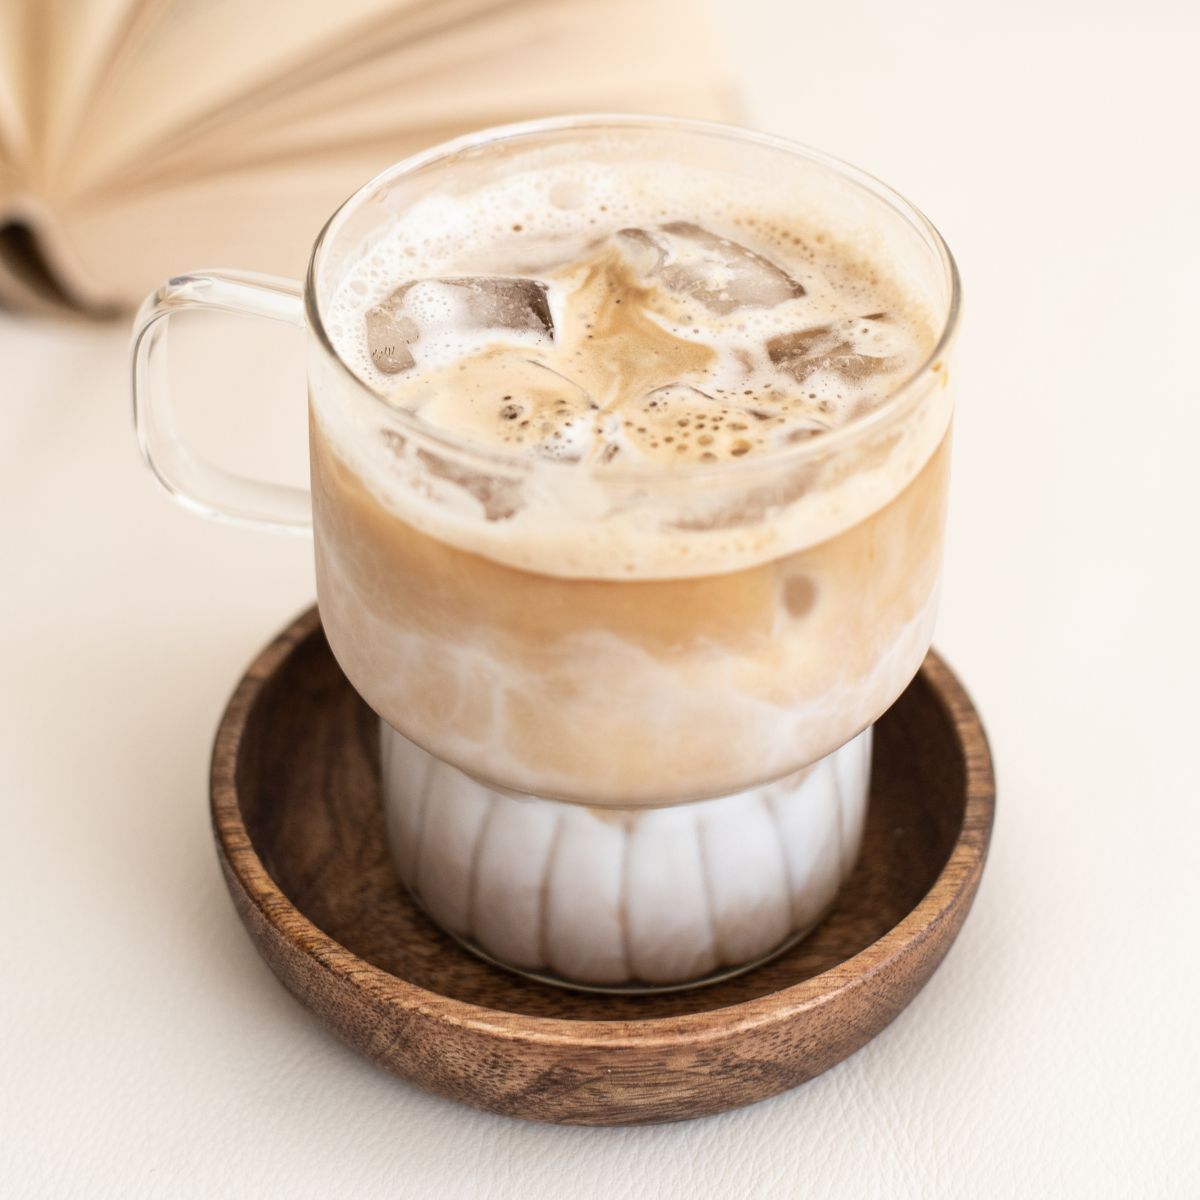 Iced lavender latte in a glass with a wooden coaster